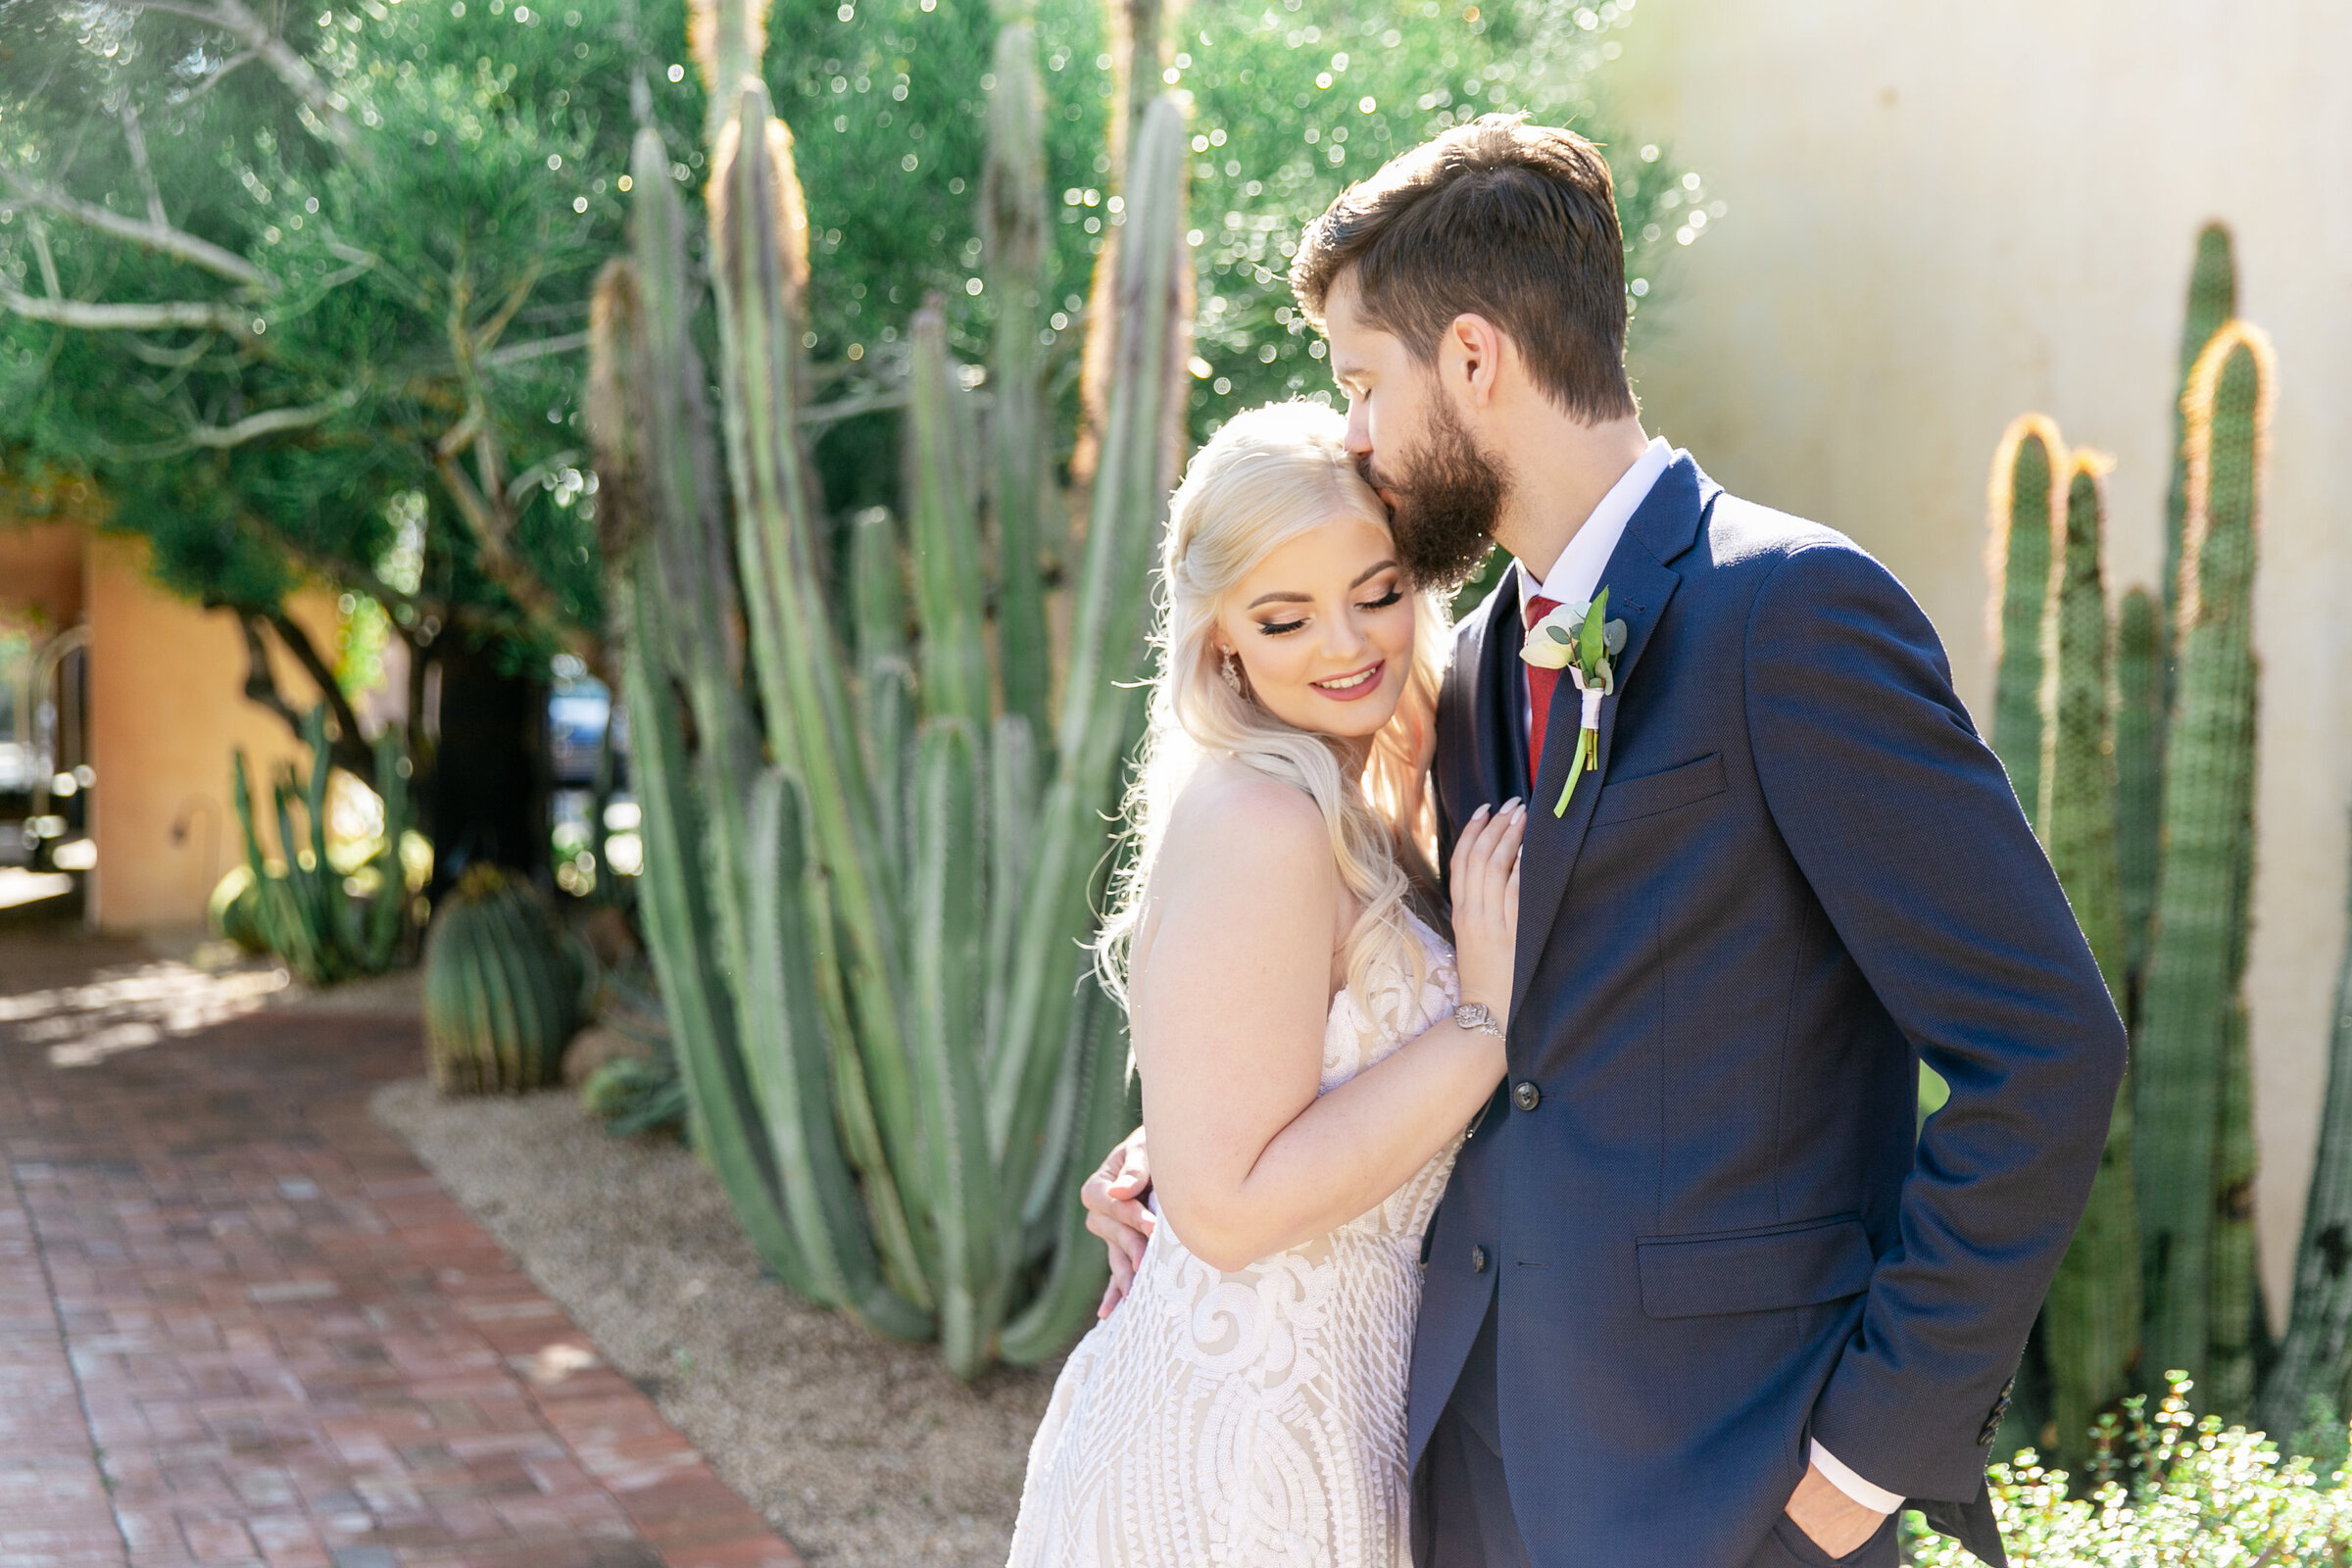 Karlie Colleen Photography - The Royal Palms Wedding - Some Like It Classic - Alex & Sam-155